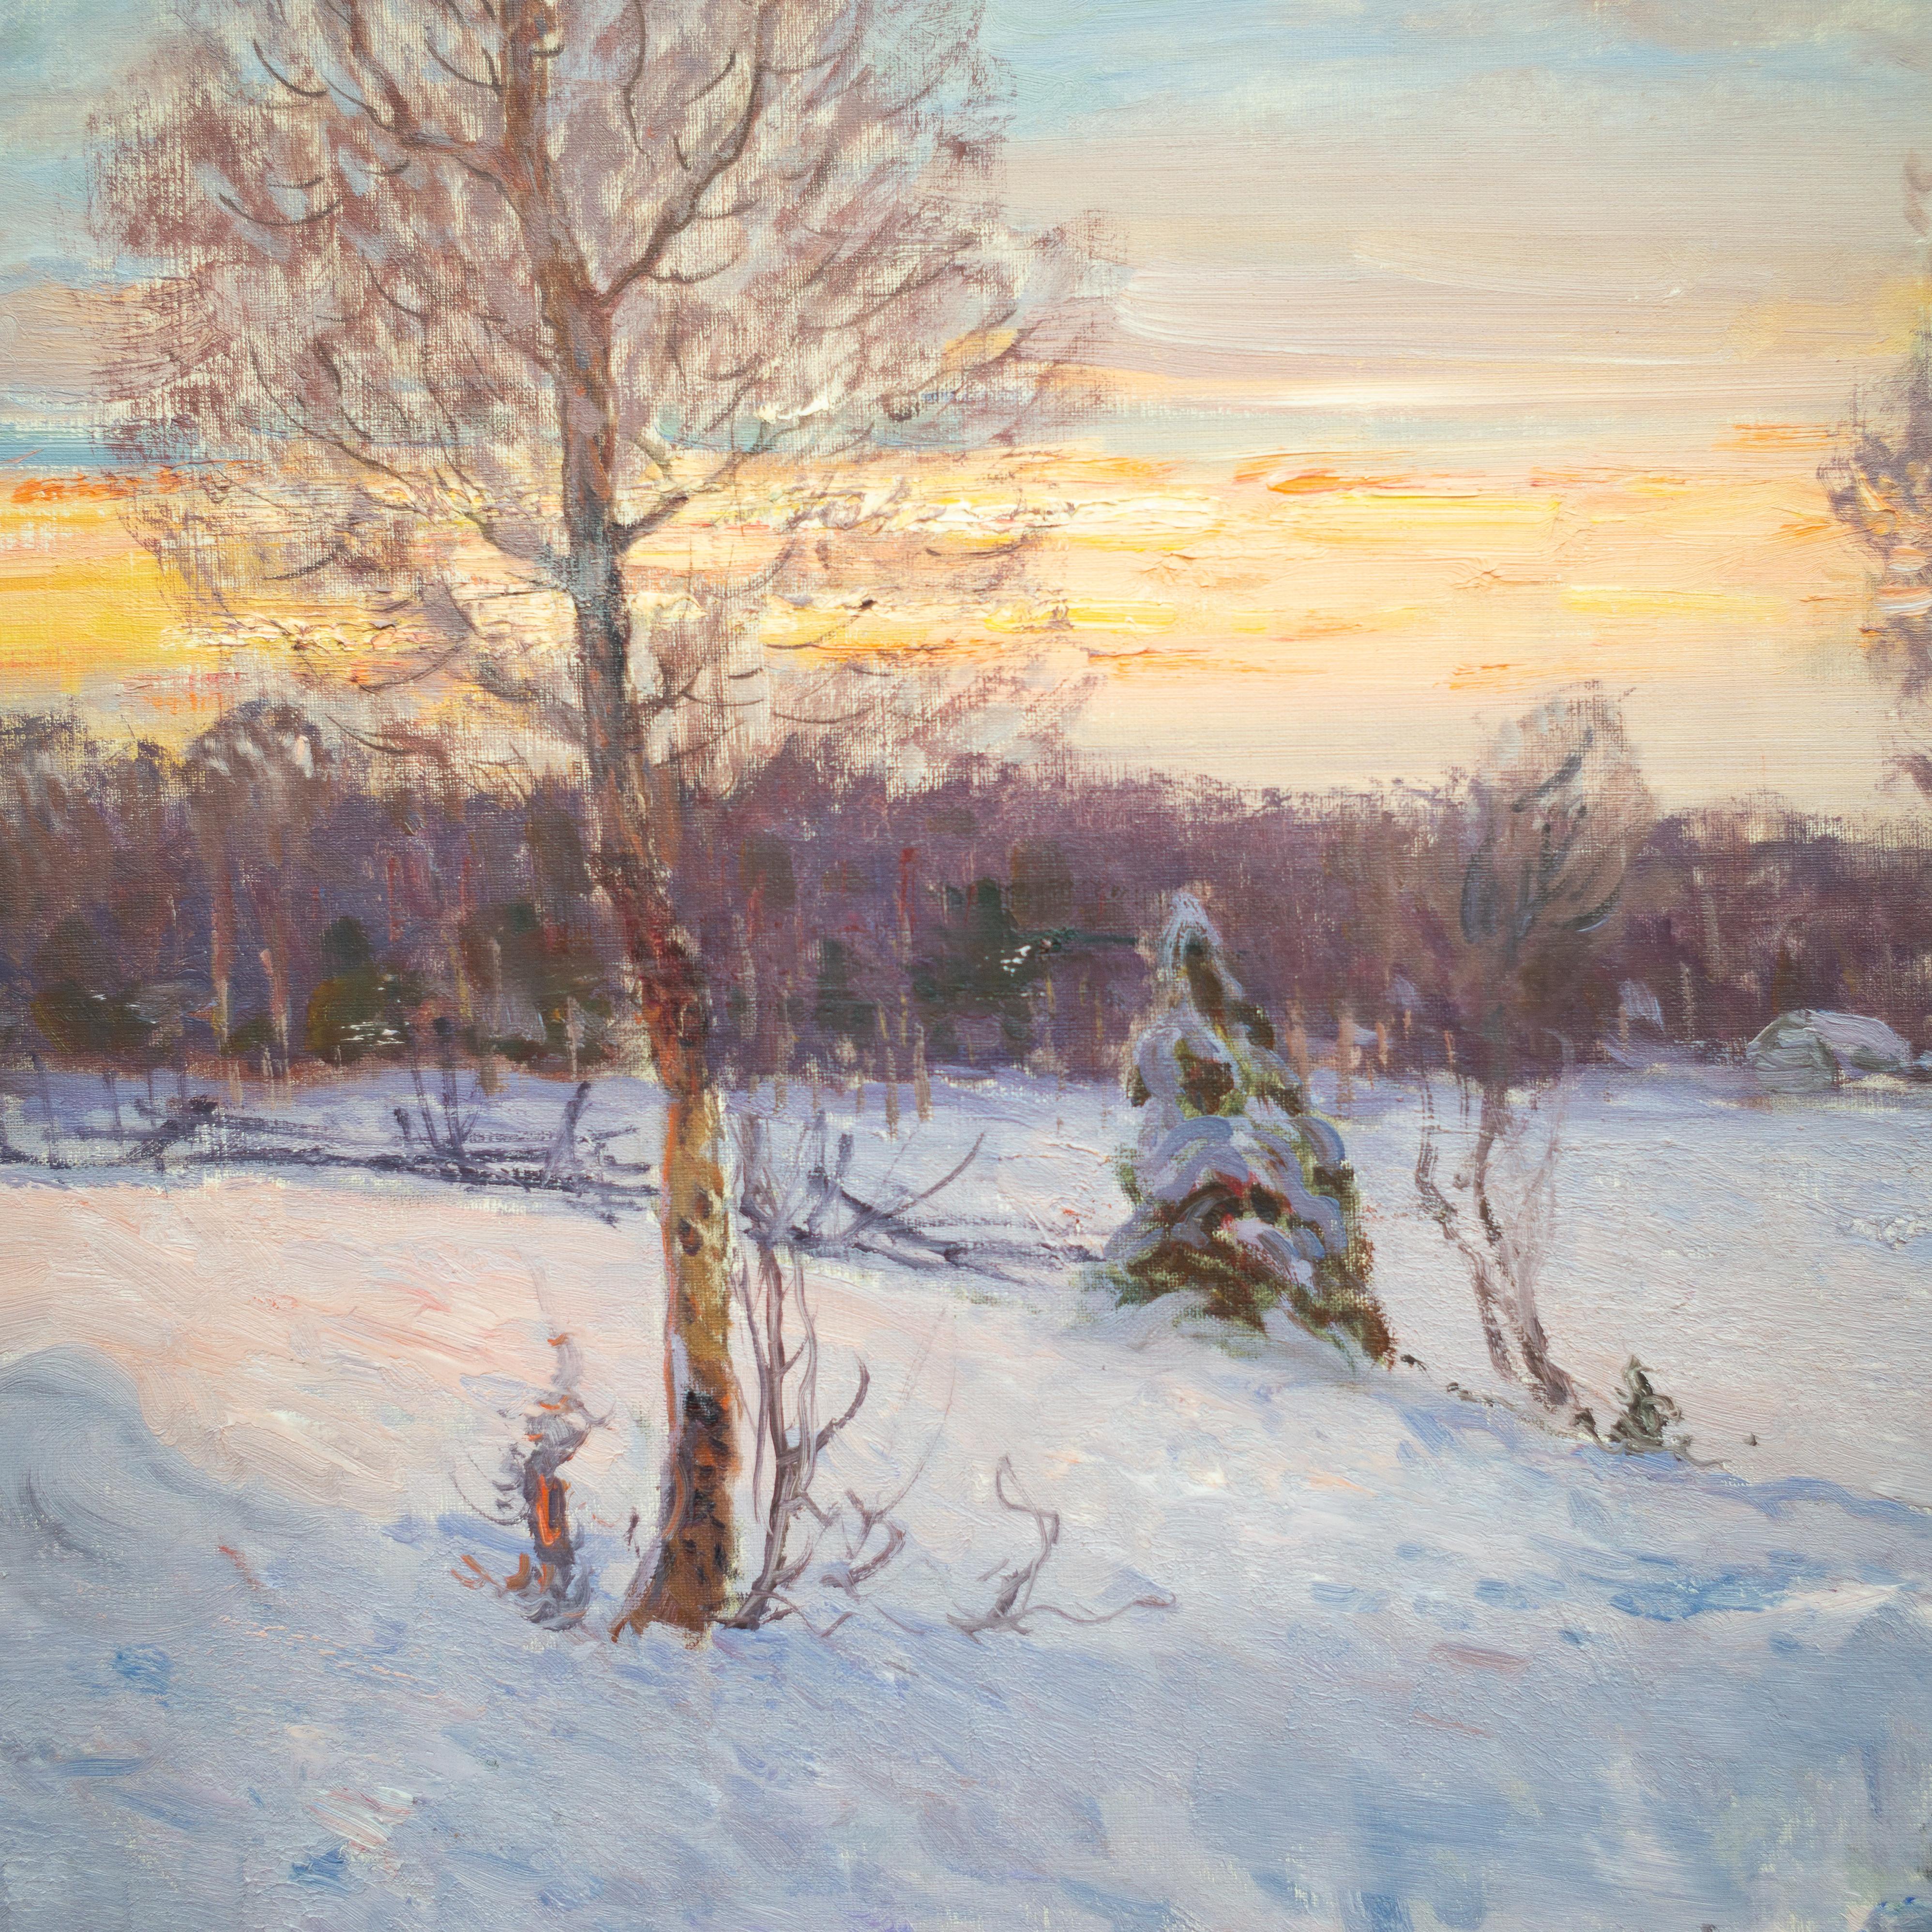 A magnificent Winter Landscape by the Swedish artist Anton Genberg (1862-1939).
In this painting from 1912, we see the characteristic features that made him so famous. 
Like the earlier impressionism movement became famous for their understanding of